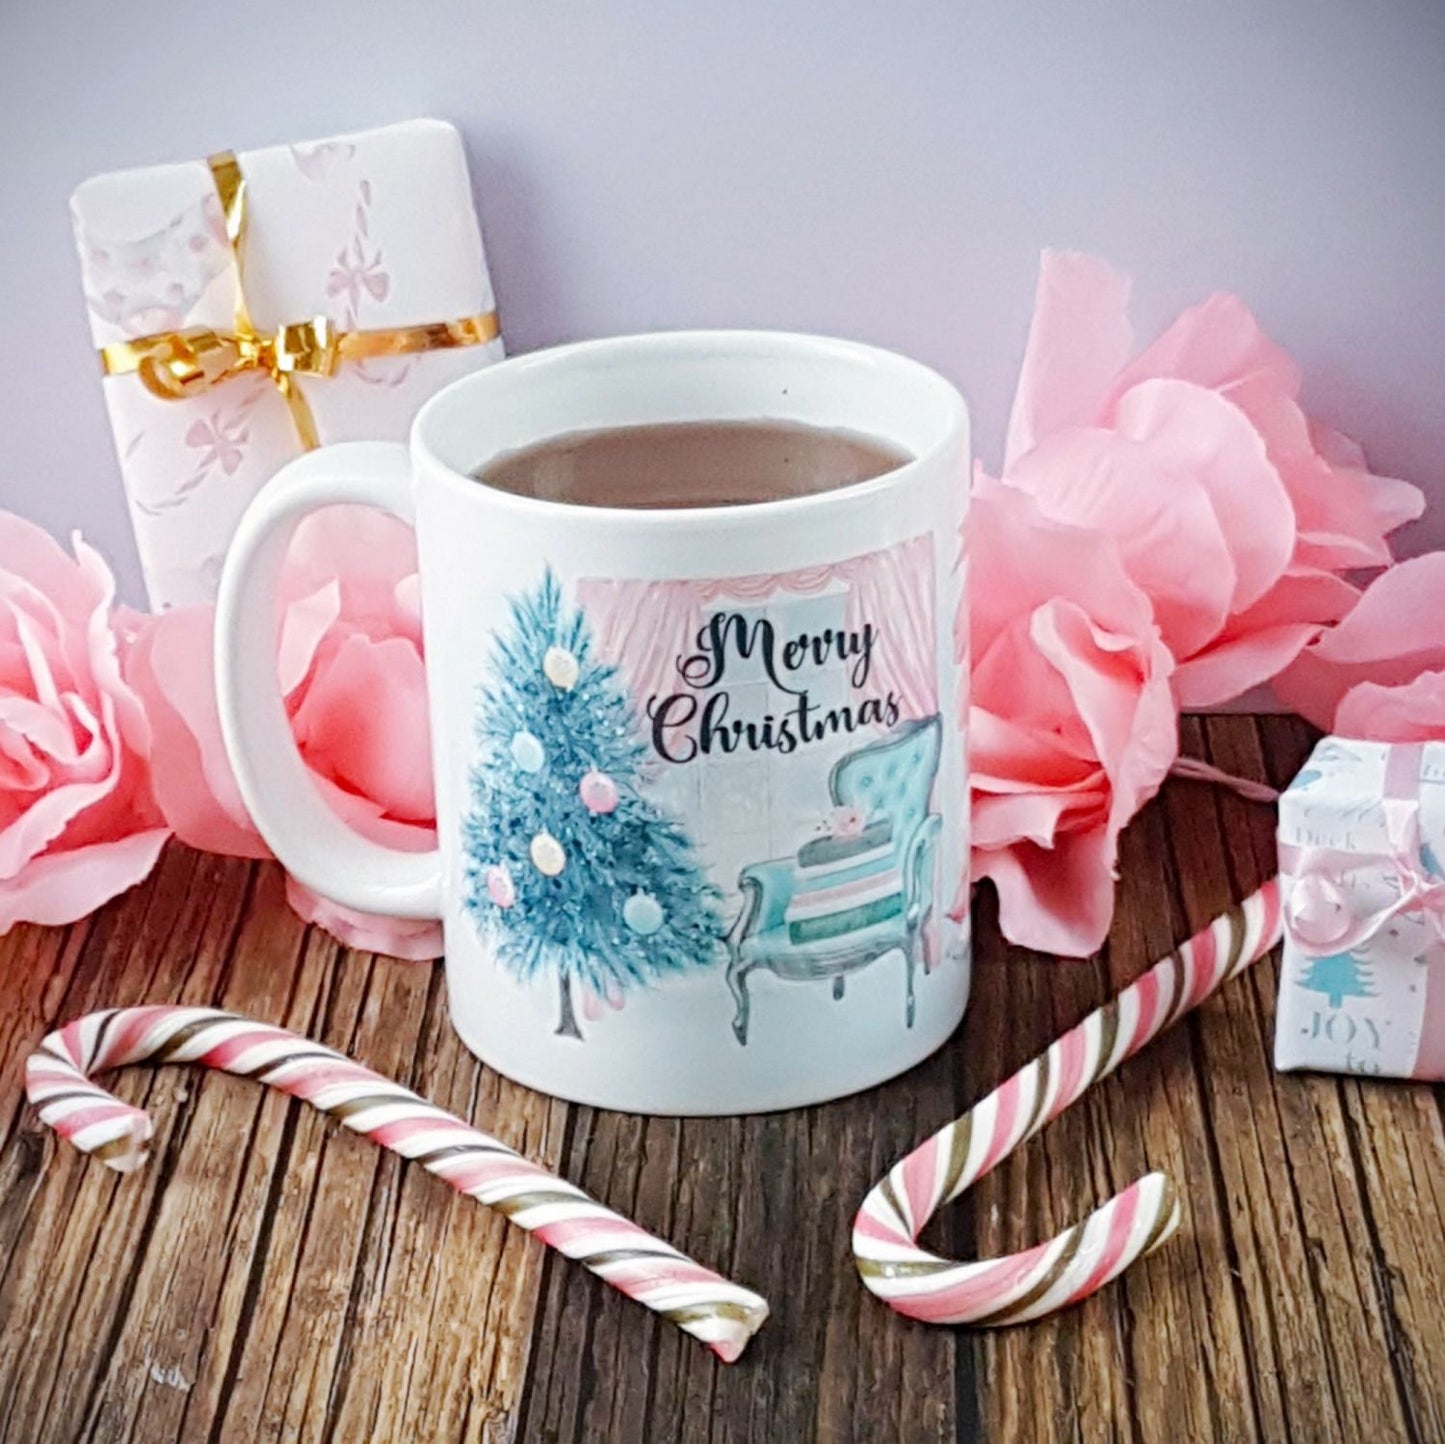 Mug - All I Want For Christmas Is... Books! Pastels